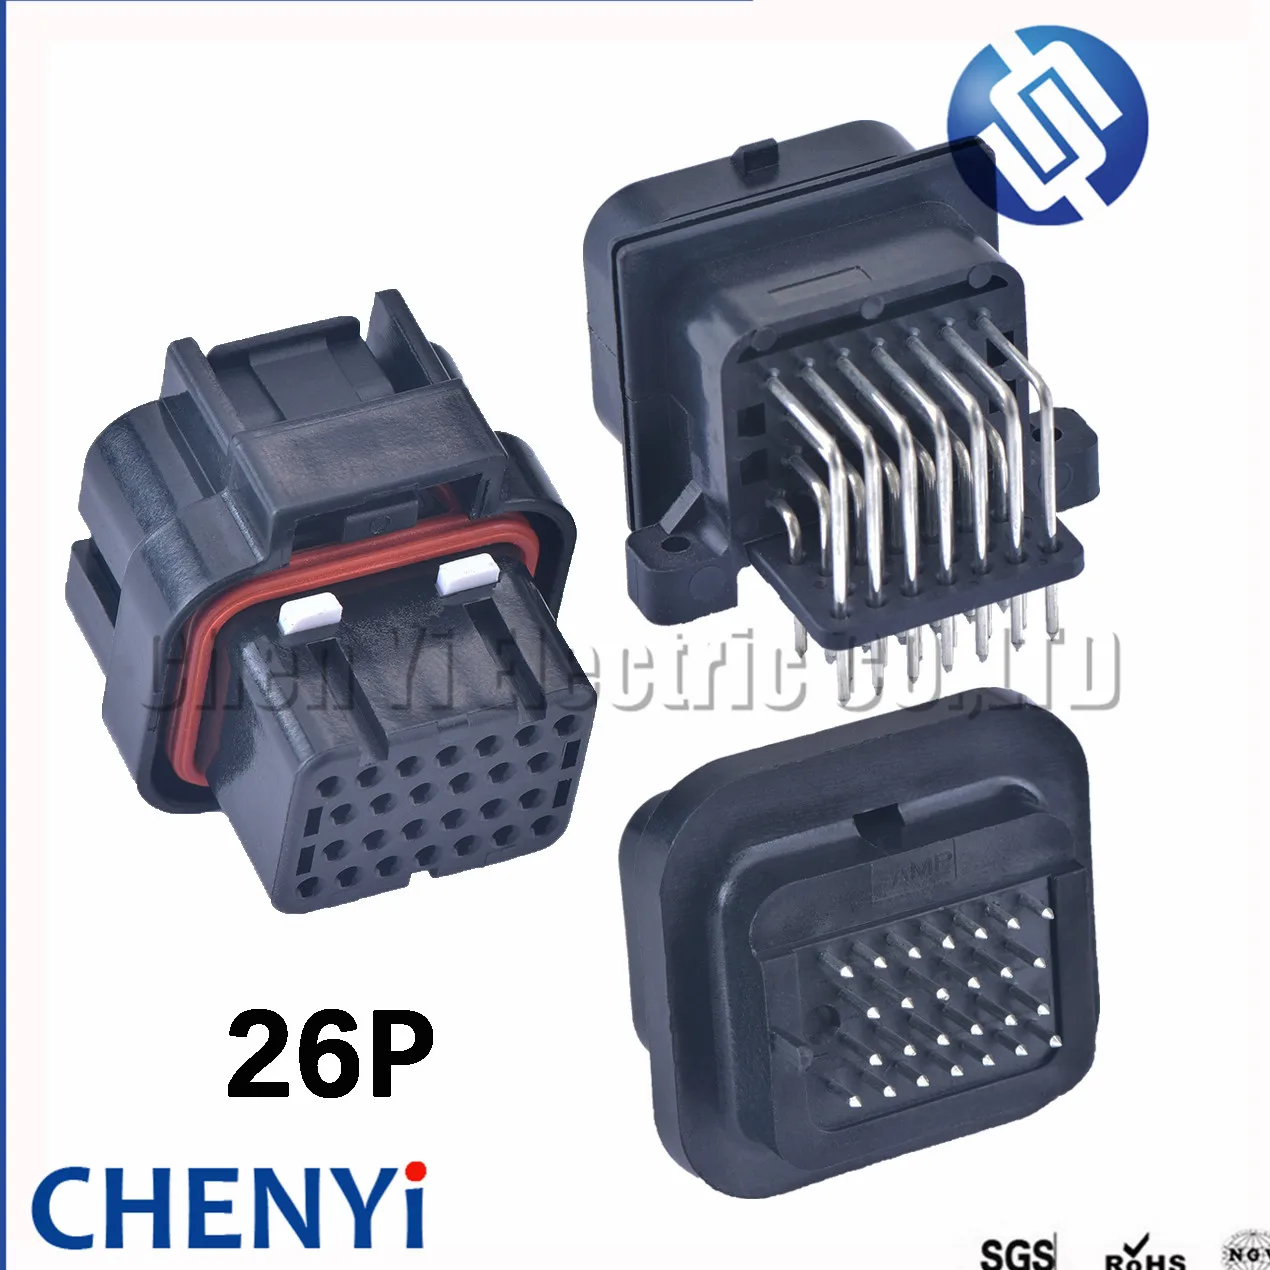 26 Pin 3-1437290-7 6437288-6 TE AMP SUPERSEAL 3 slots electrical female or male Straight PCB wire to board connector ECU plug